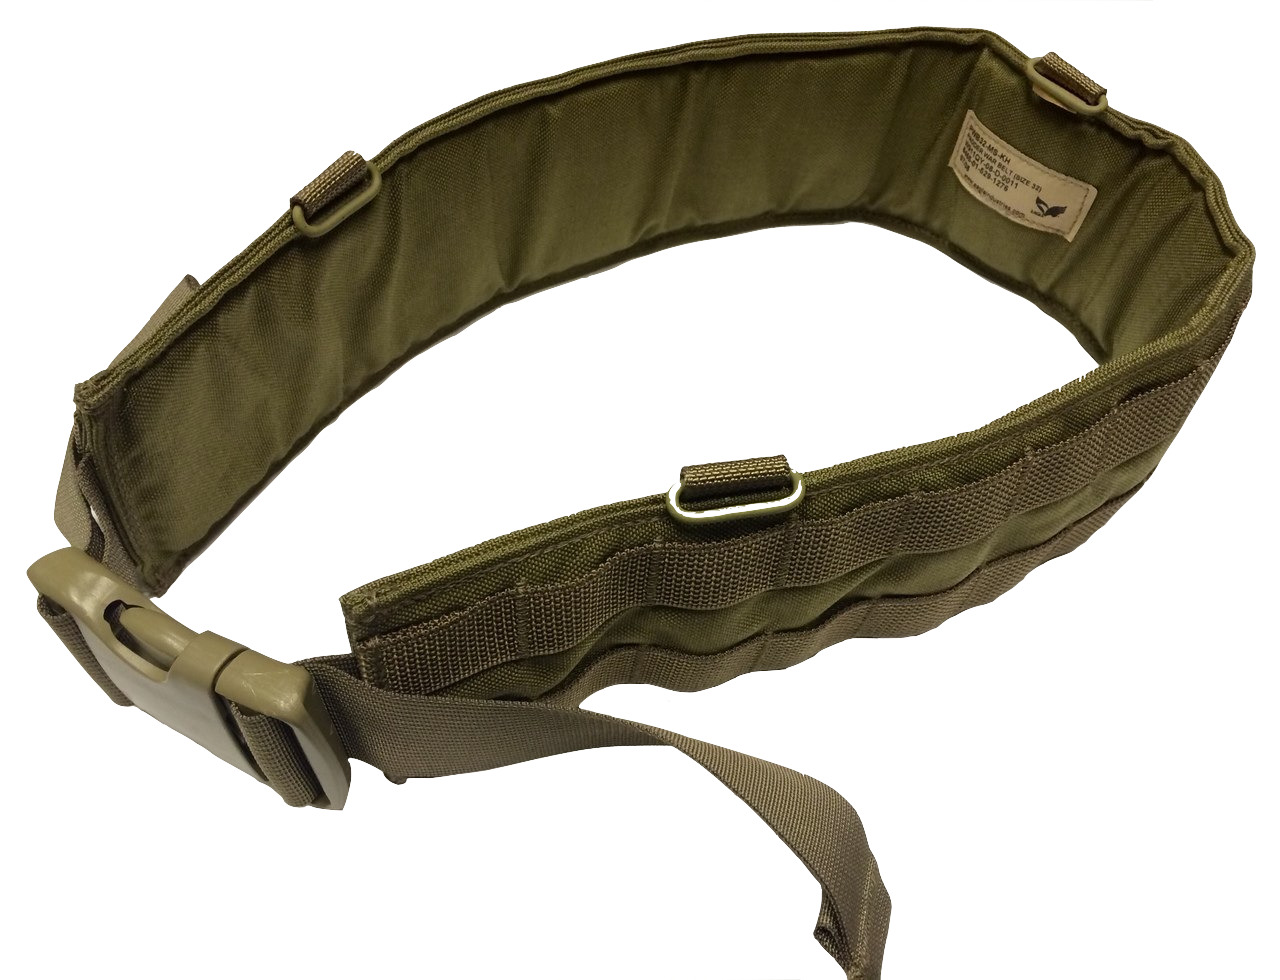 NEW Made in US Military MOLLE 2 Eagle Industries War Belt Tan Khaki 32-47